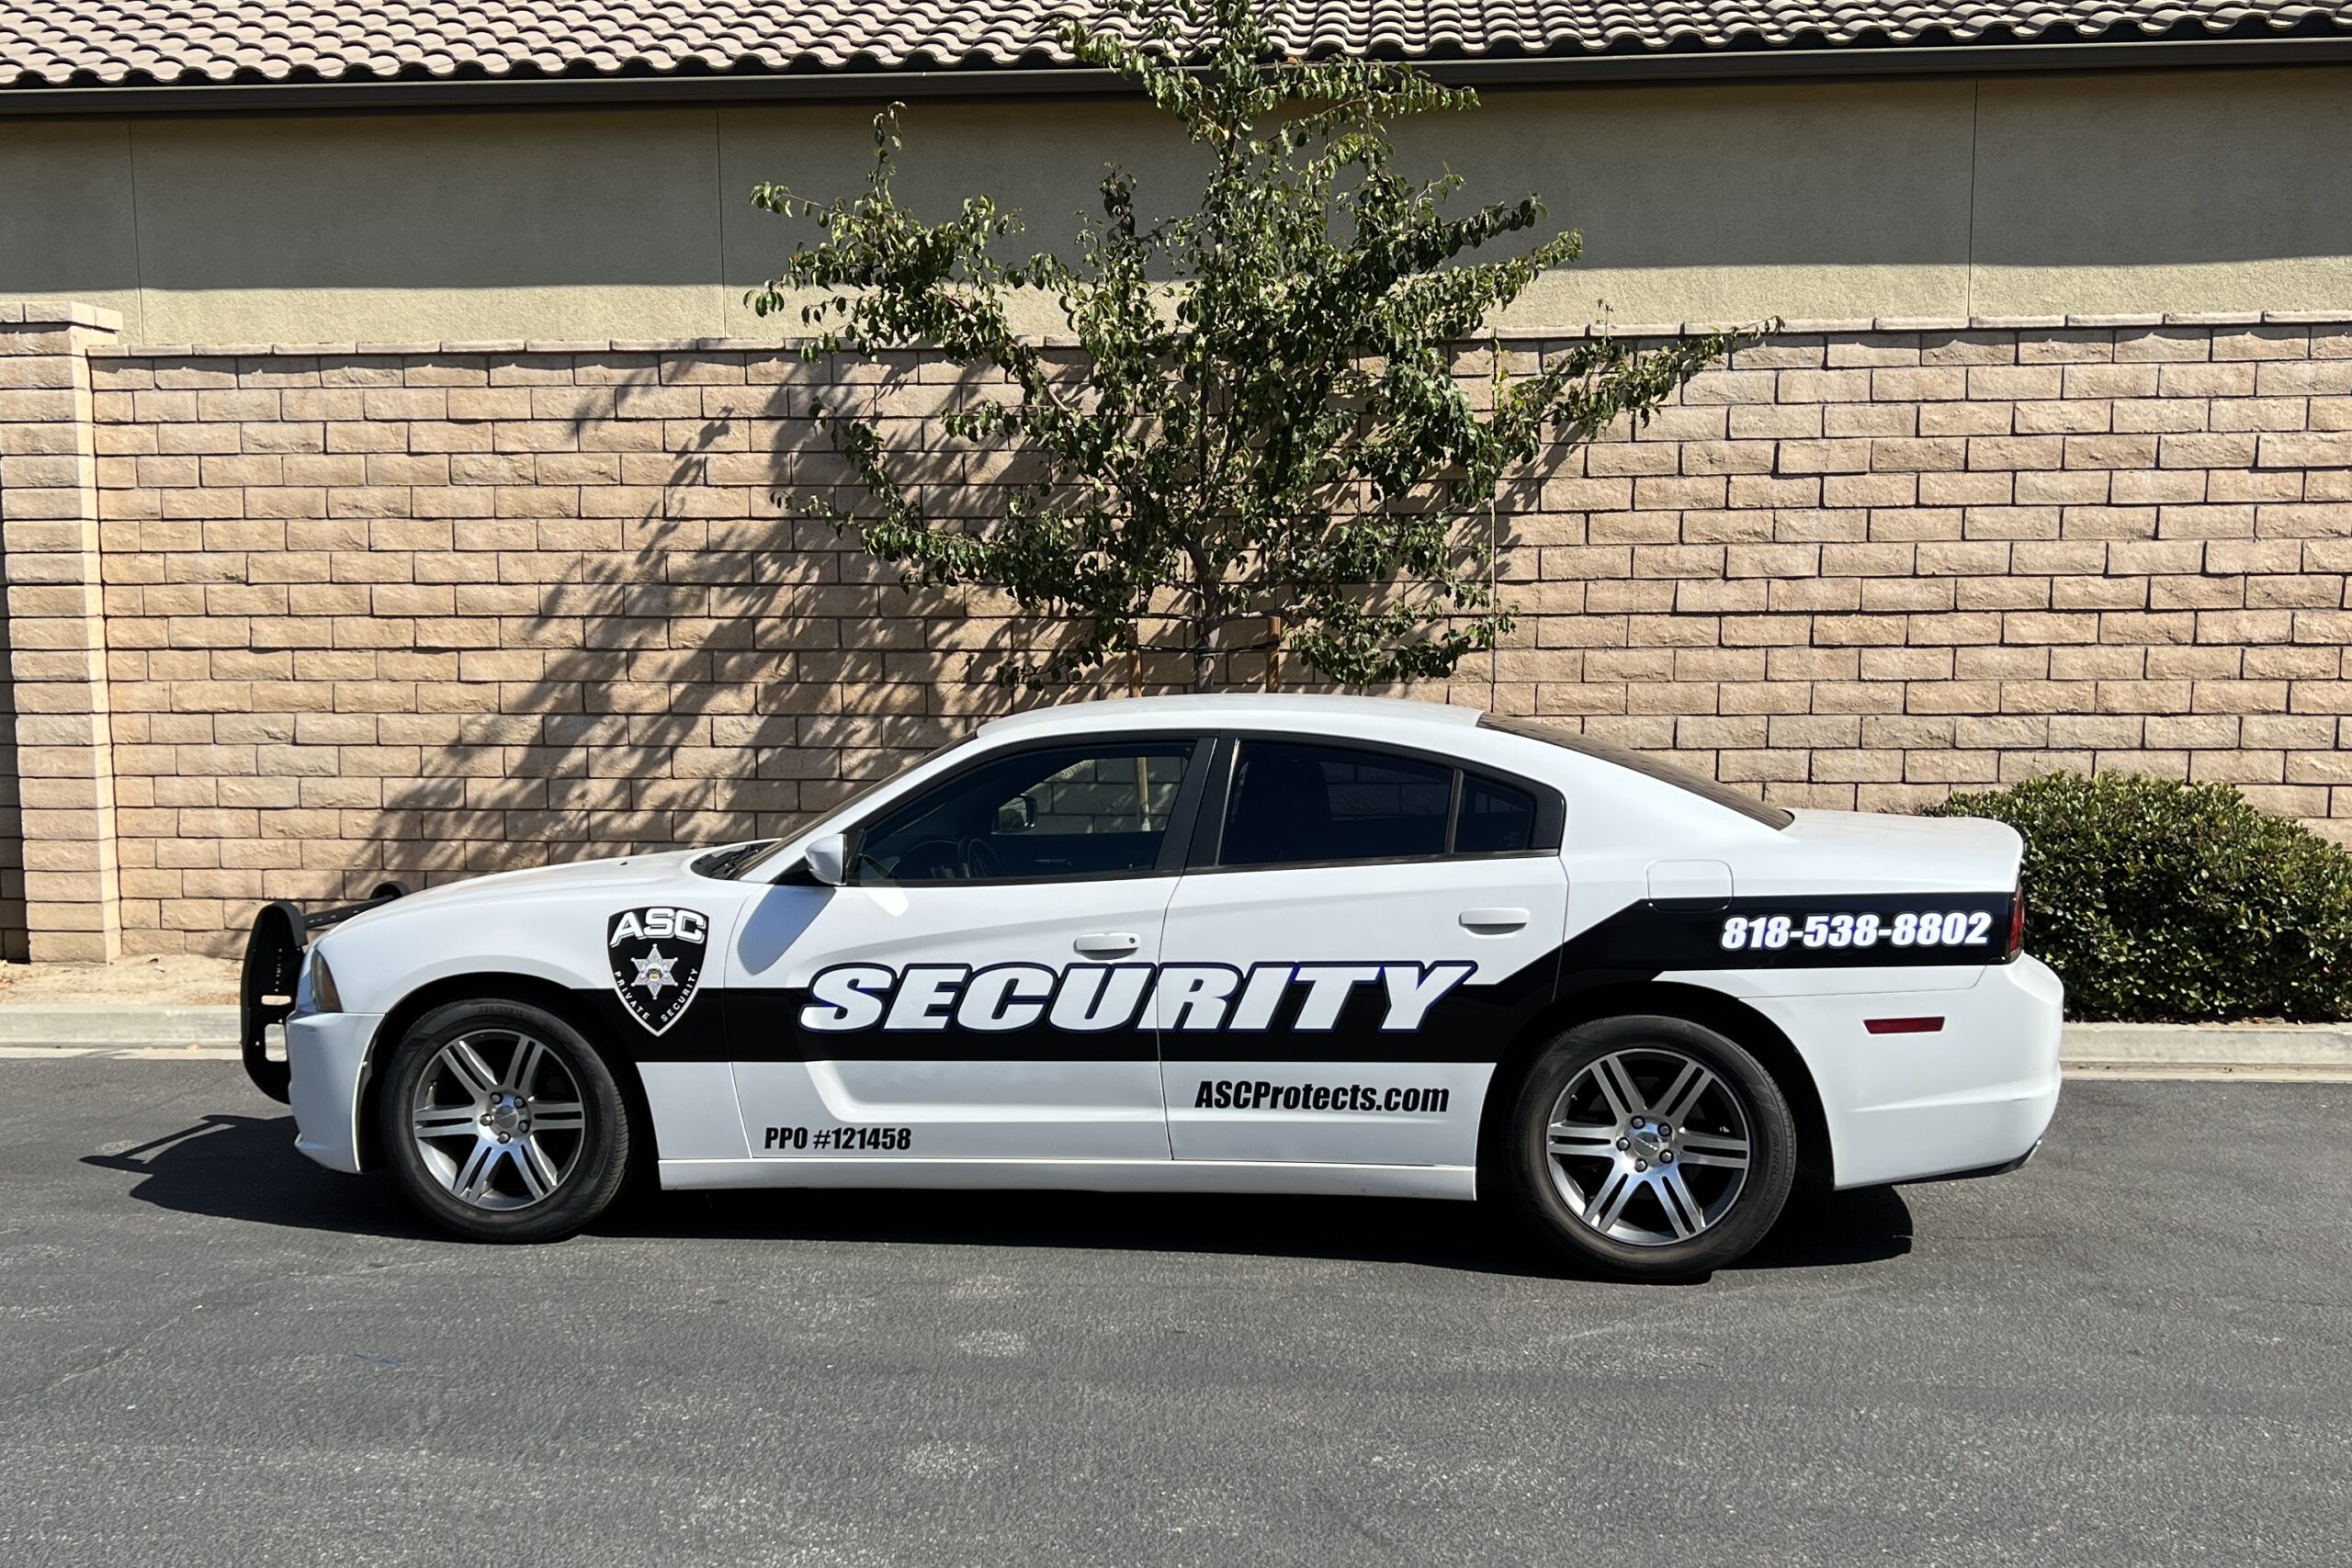 ASC Private Security mobile patrol car parked on the sidewalk